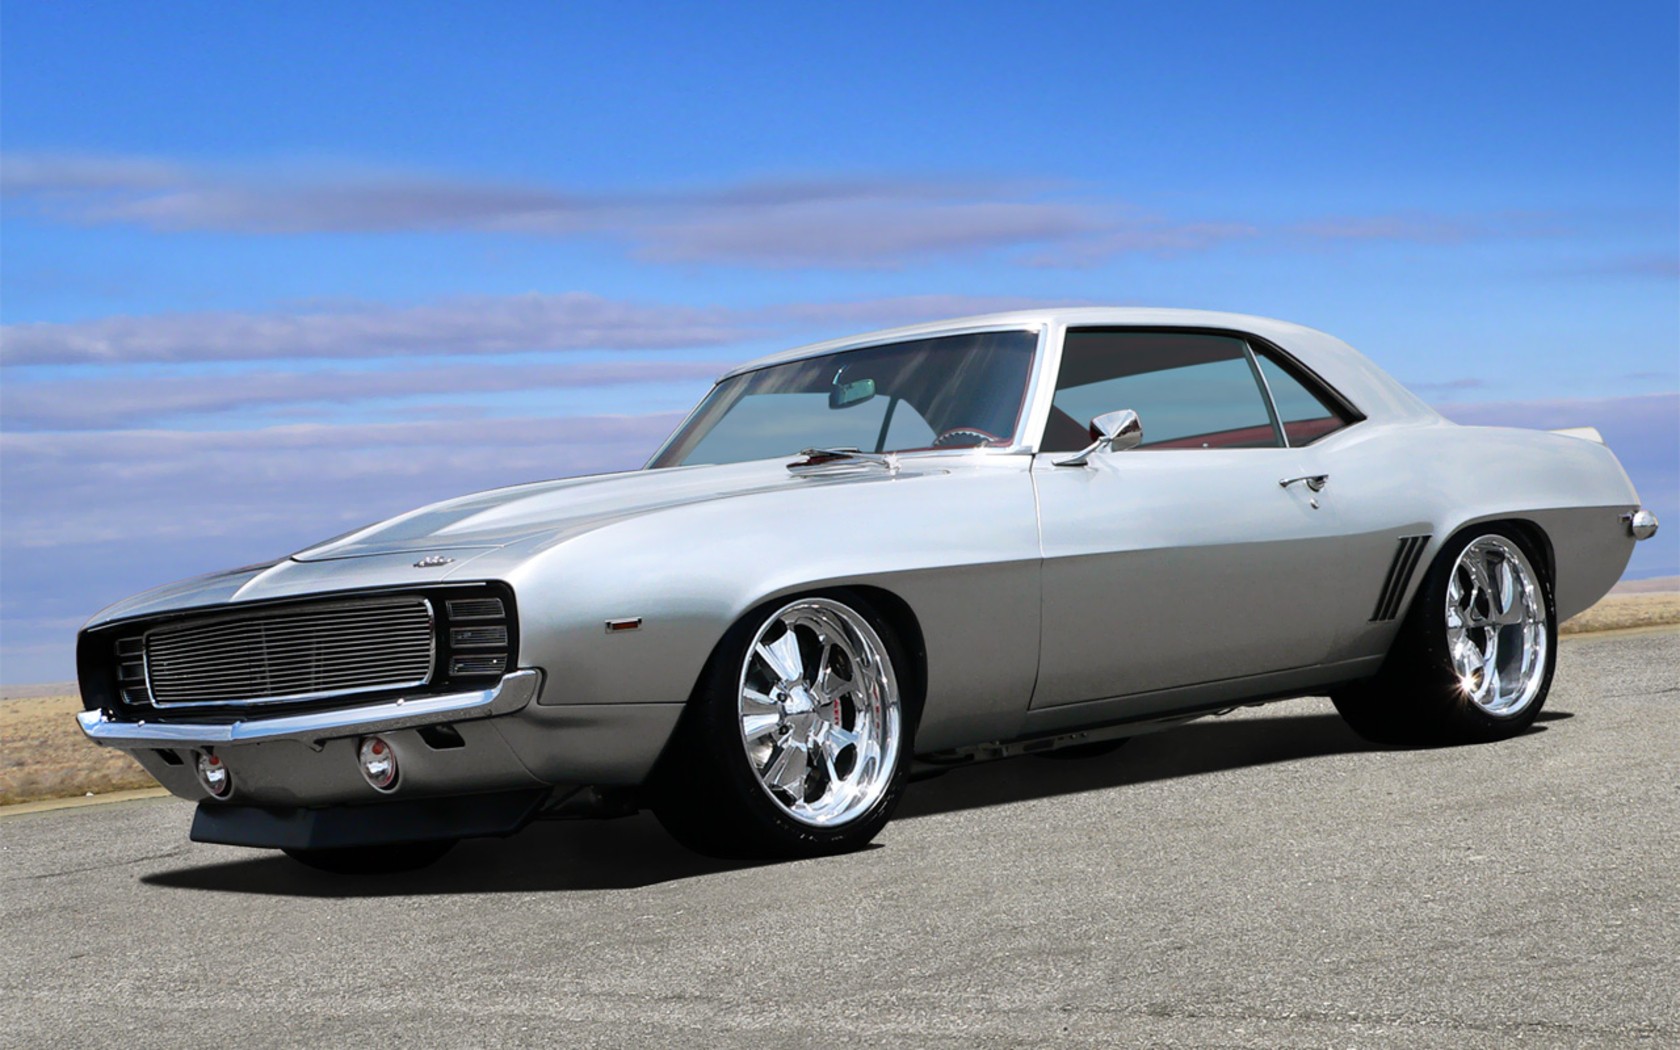  muscle cars silver vehicles Chevrolet Camaro SS sports cars wallpaper